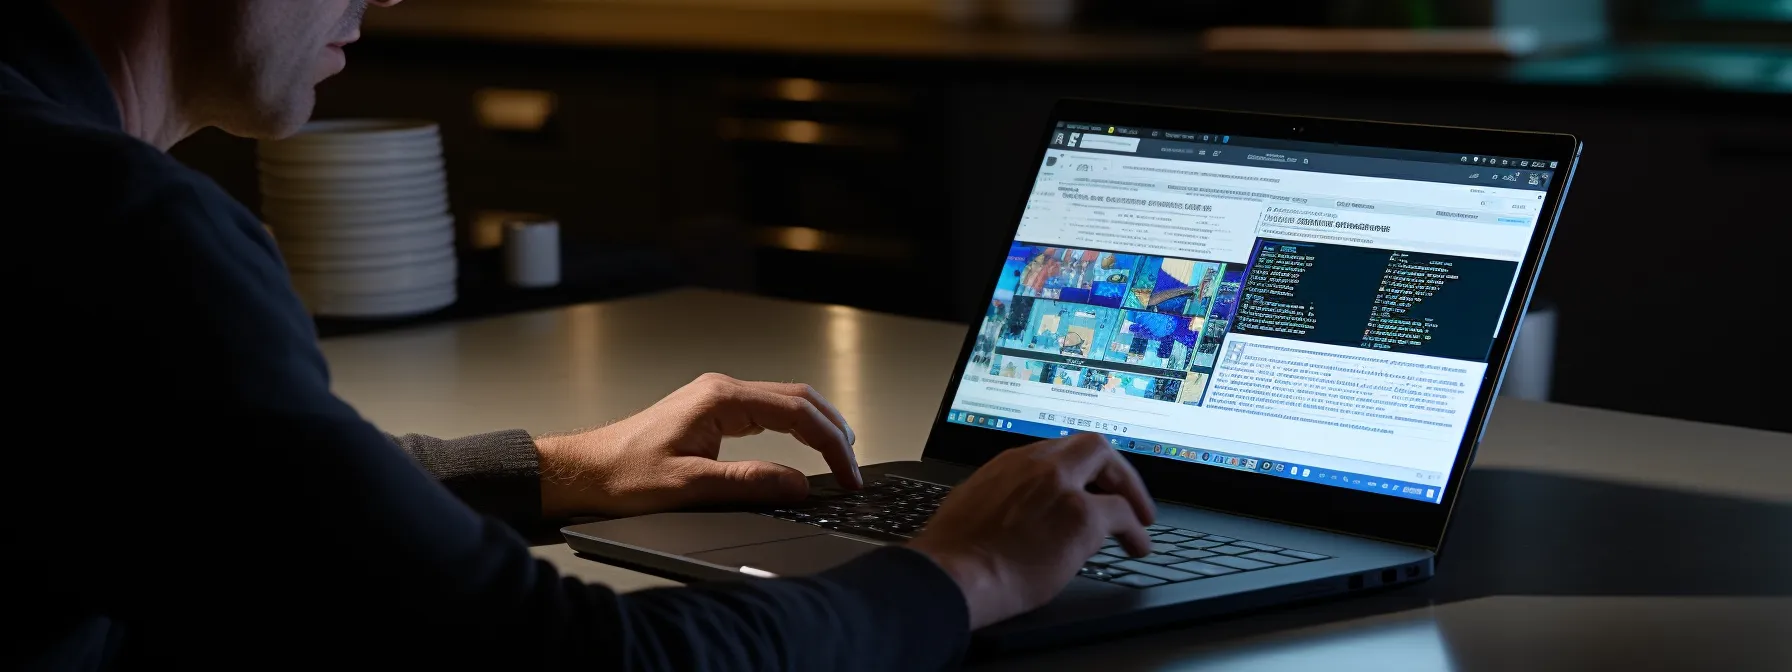 a person studying seo training materials and tools on a laptop.